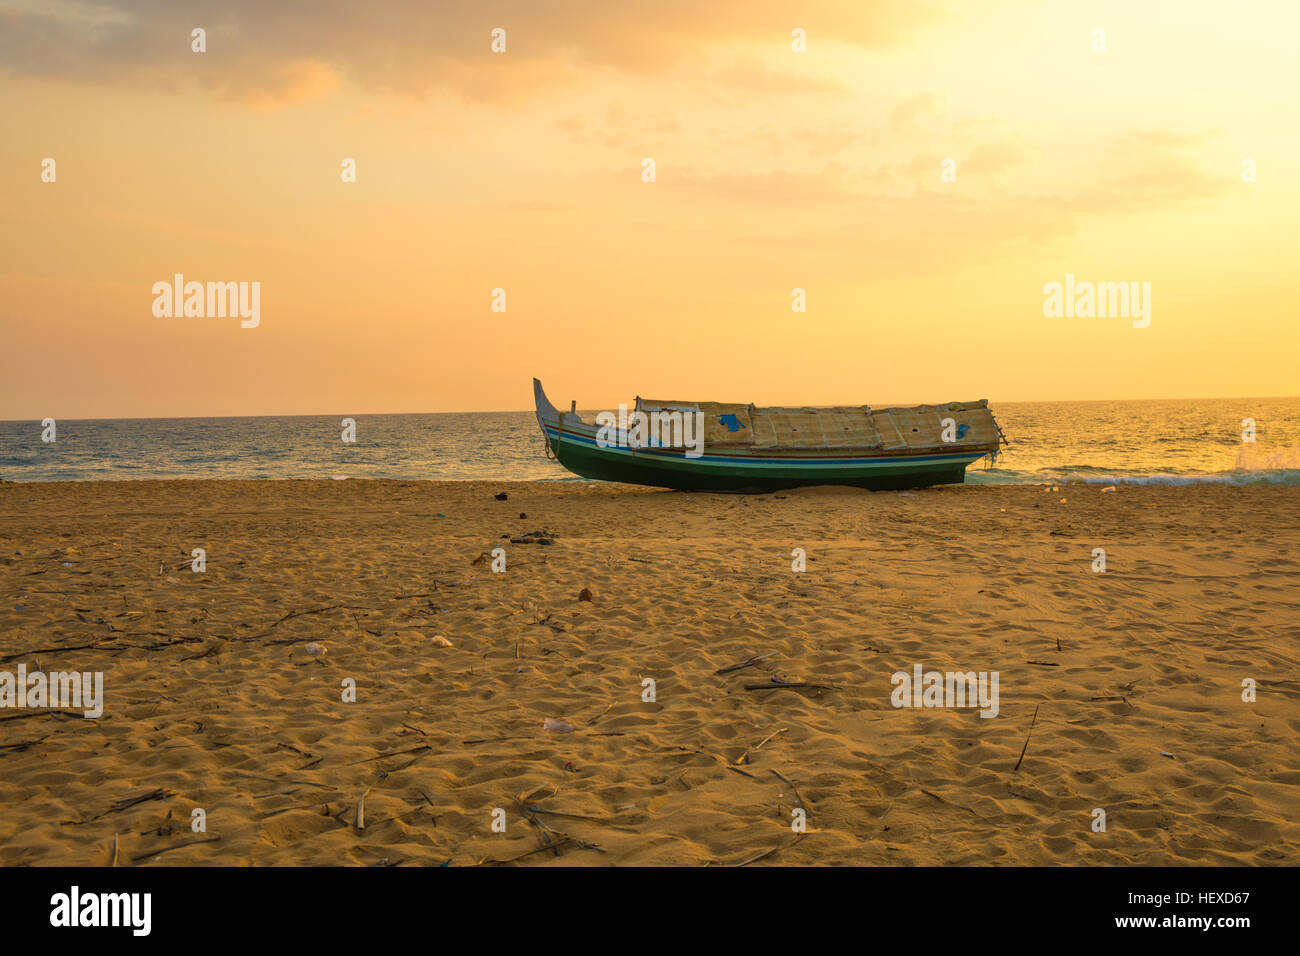 An old traditional fishing boat on the coast of Kerala Beach under a golden sunset Stock Photo